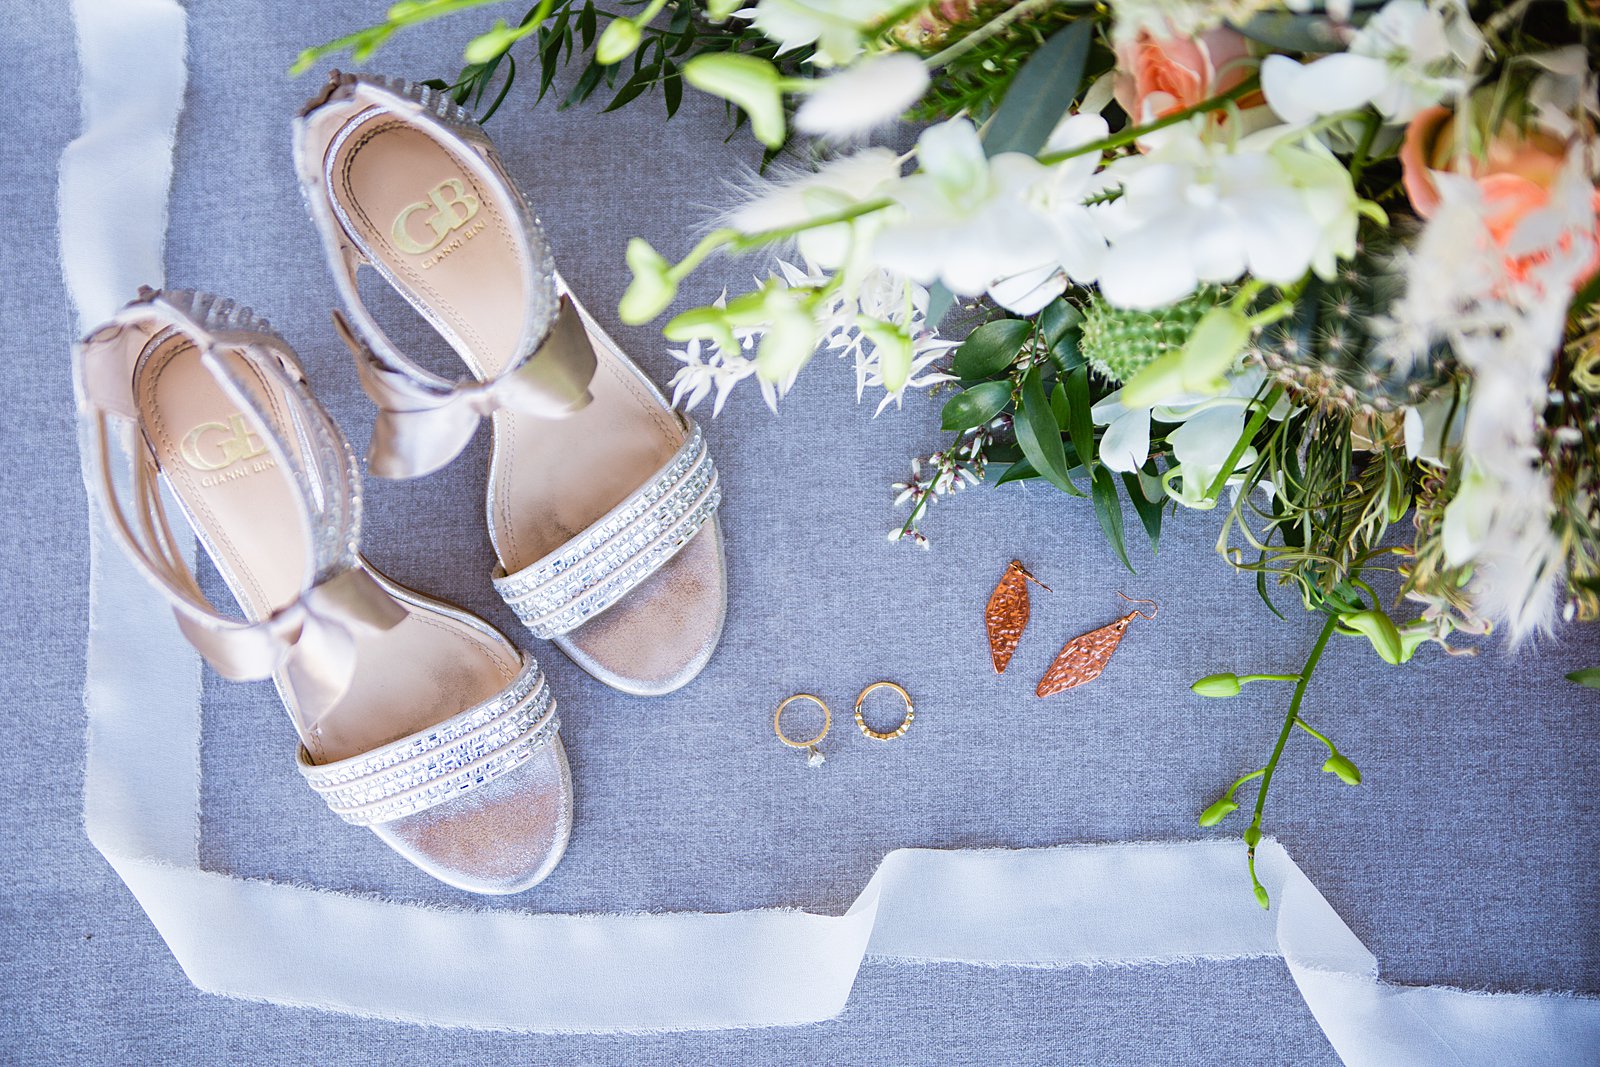 Brides's wedding day details of cream shoes, wedding ring, copper earrings, and bouquet by PMA Photography.